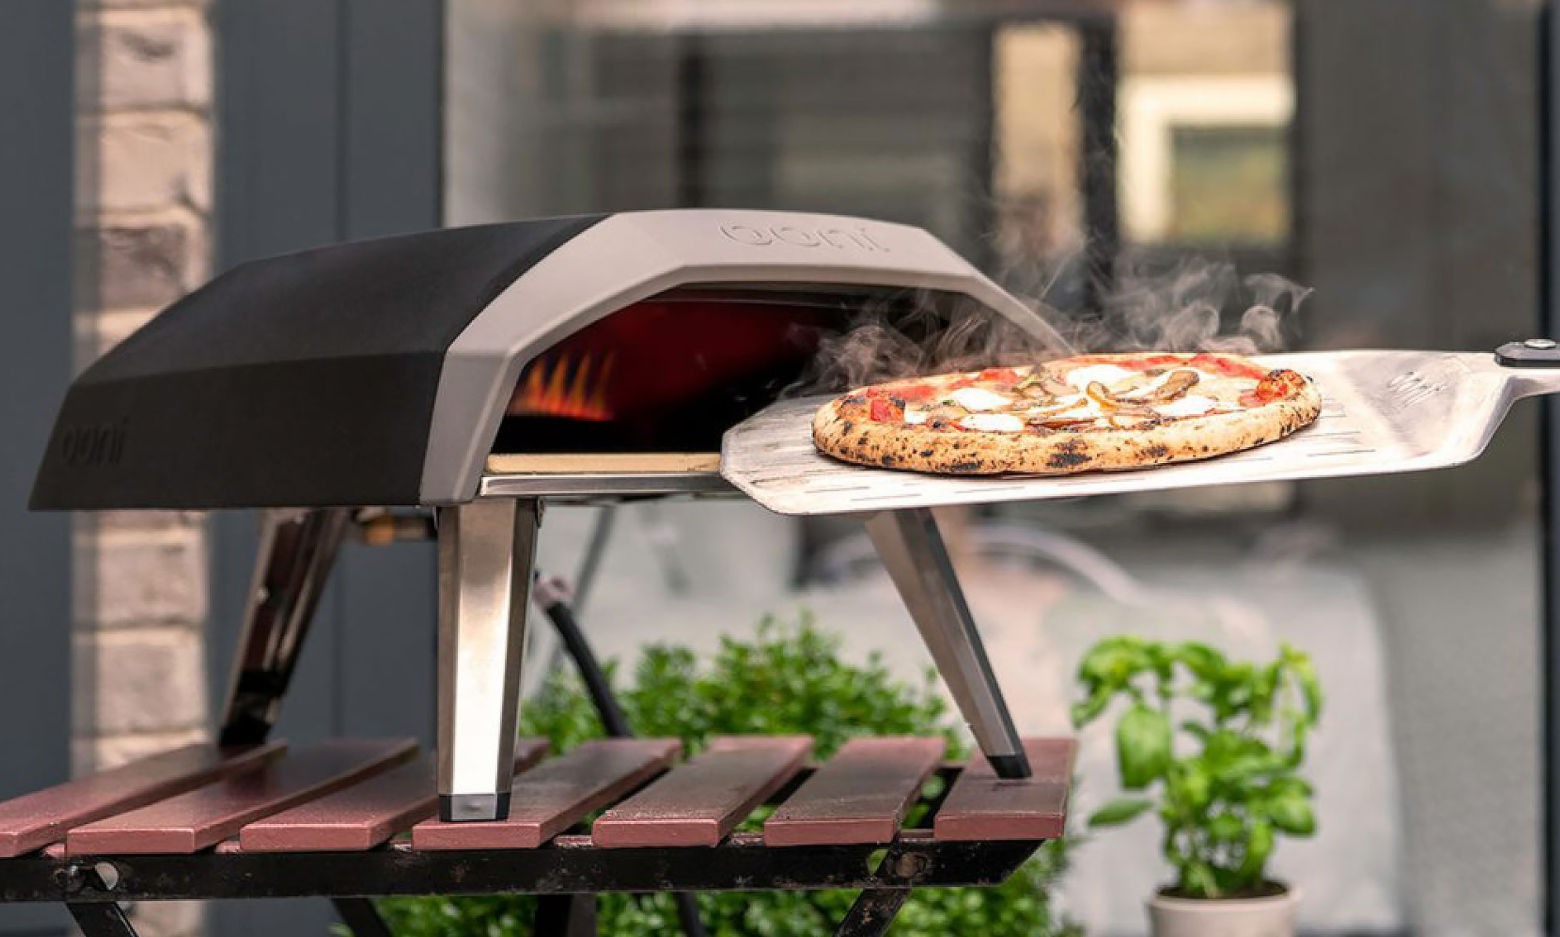 What Are The Pizza Ovens Brands Reliable